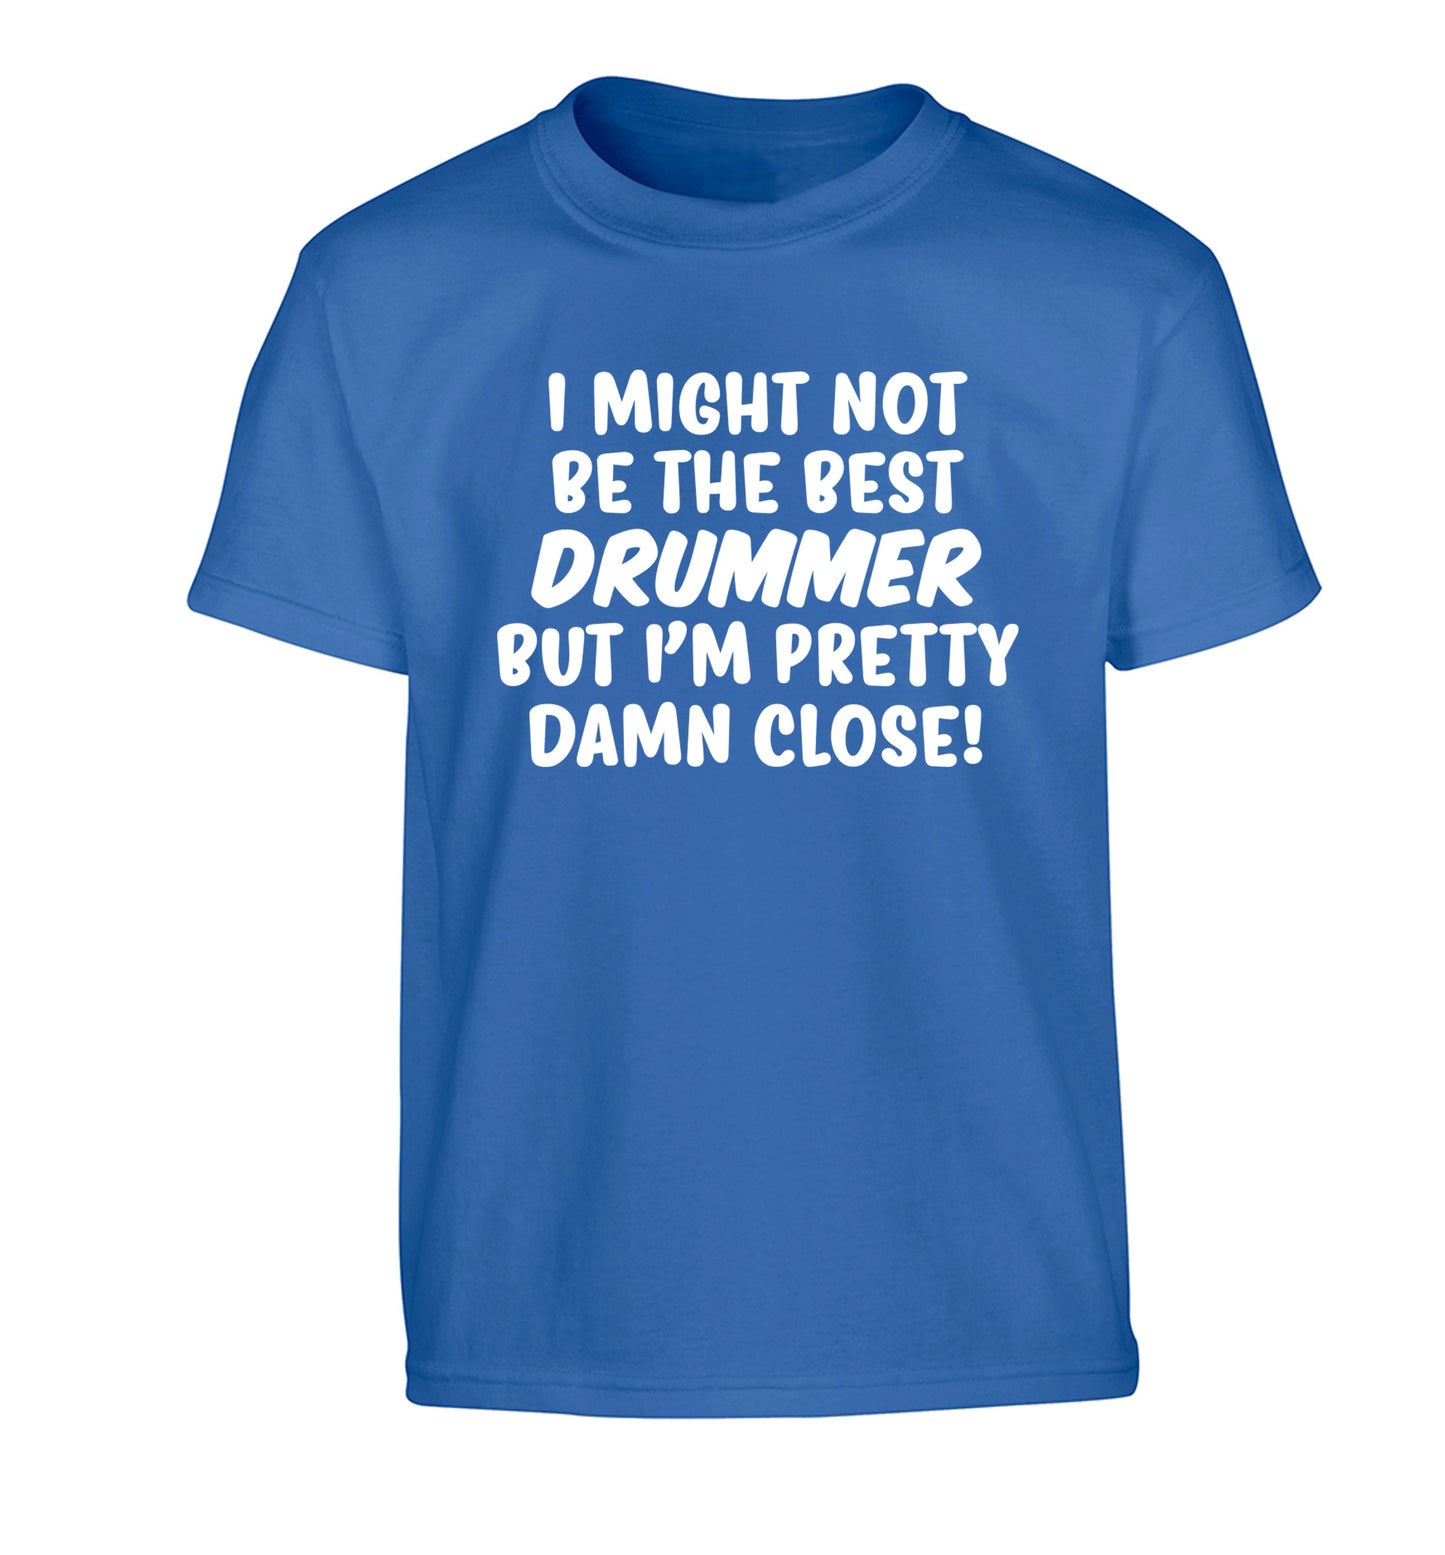 I might not be the best drummer but I'm pretty close! Children's blue Tshirt 12-14 Years